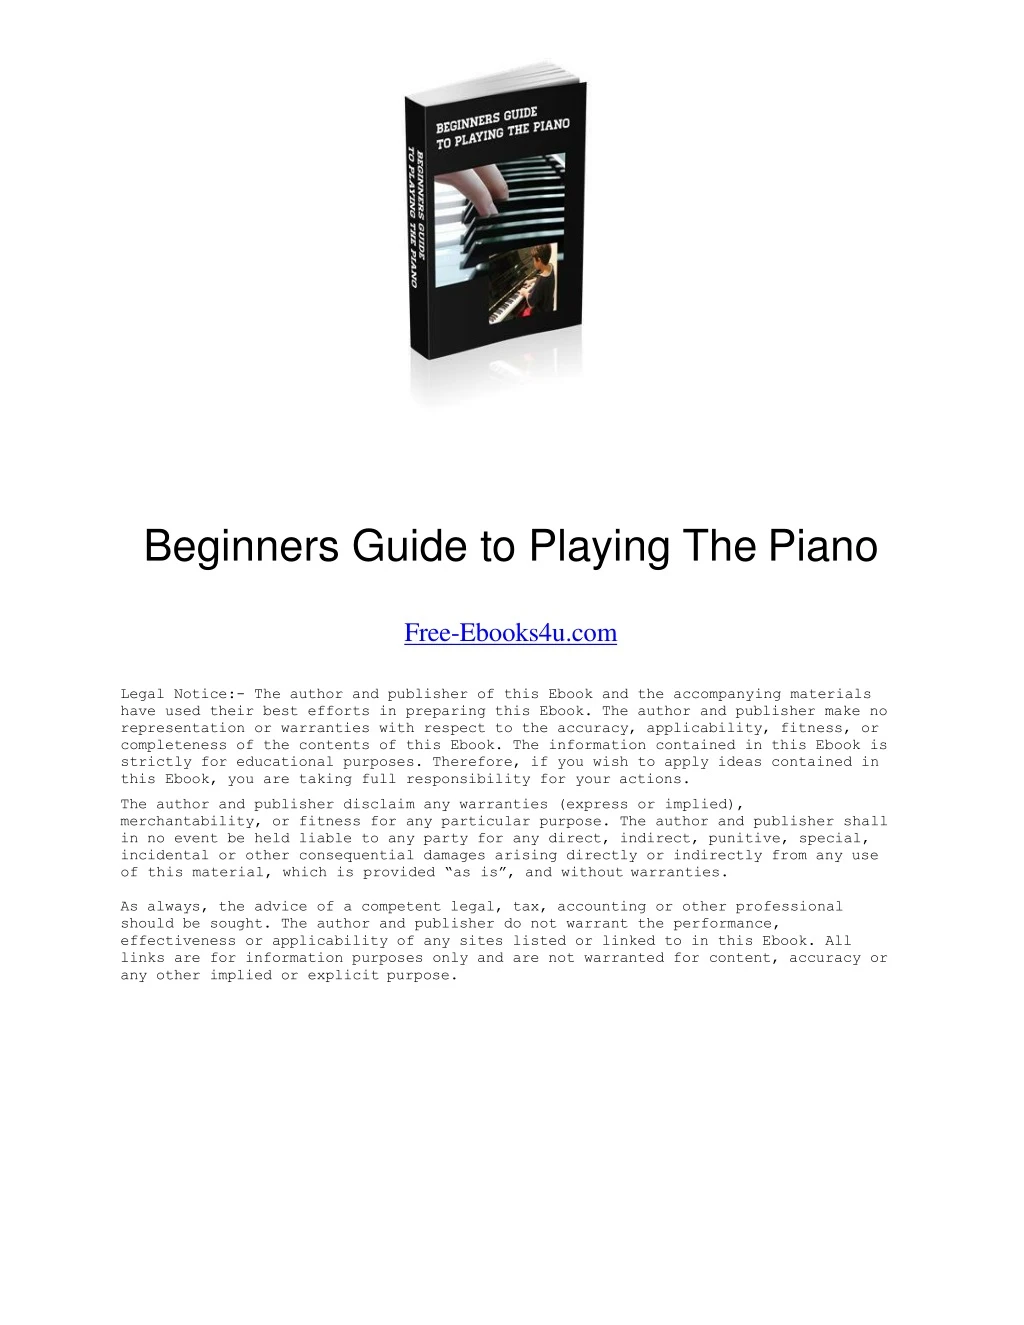 beginners guide to playing the piano